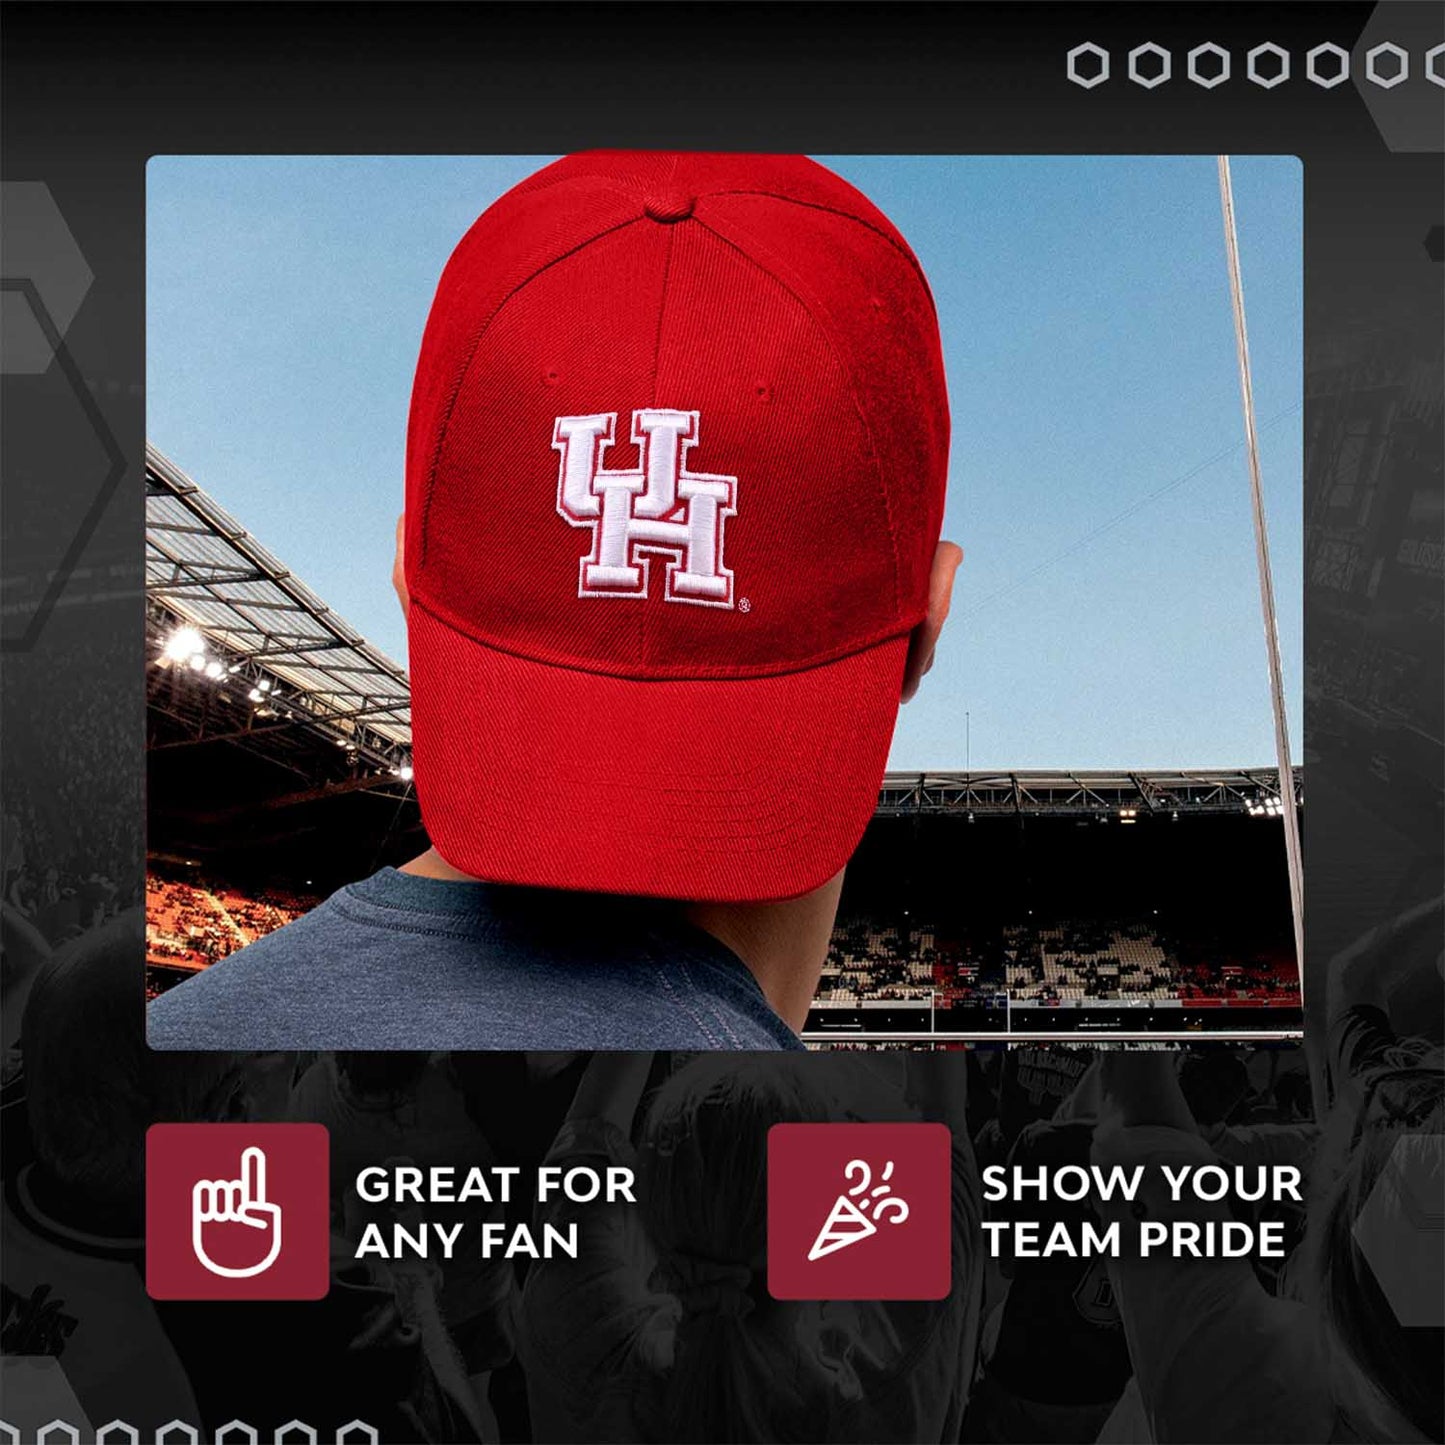 Houston Cougars NCAA Adult Relaxed Fit Logo Hat - Red